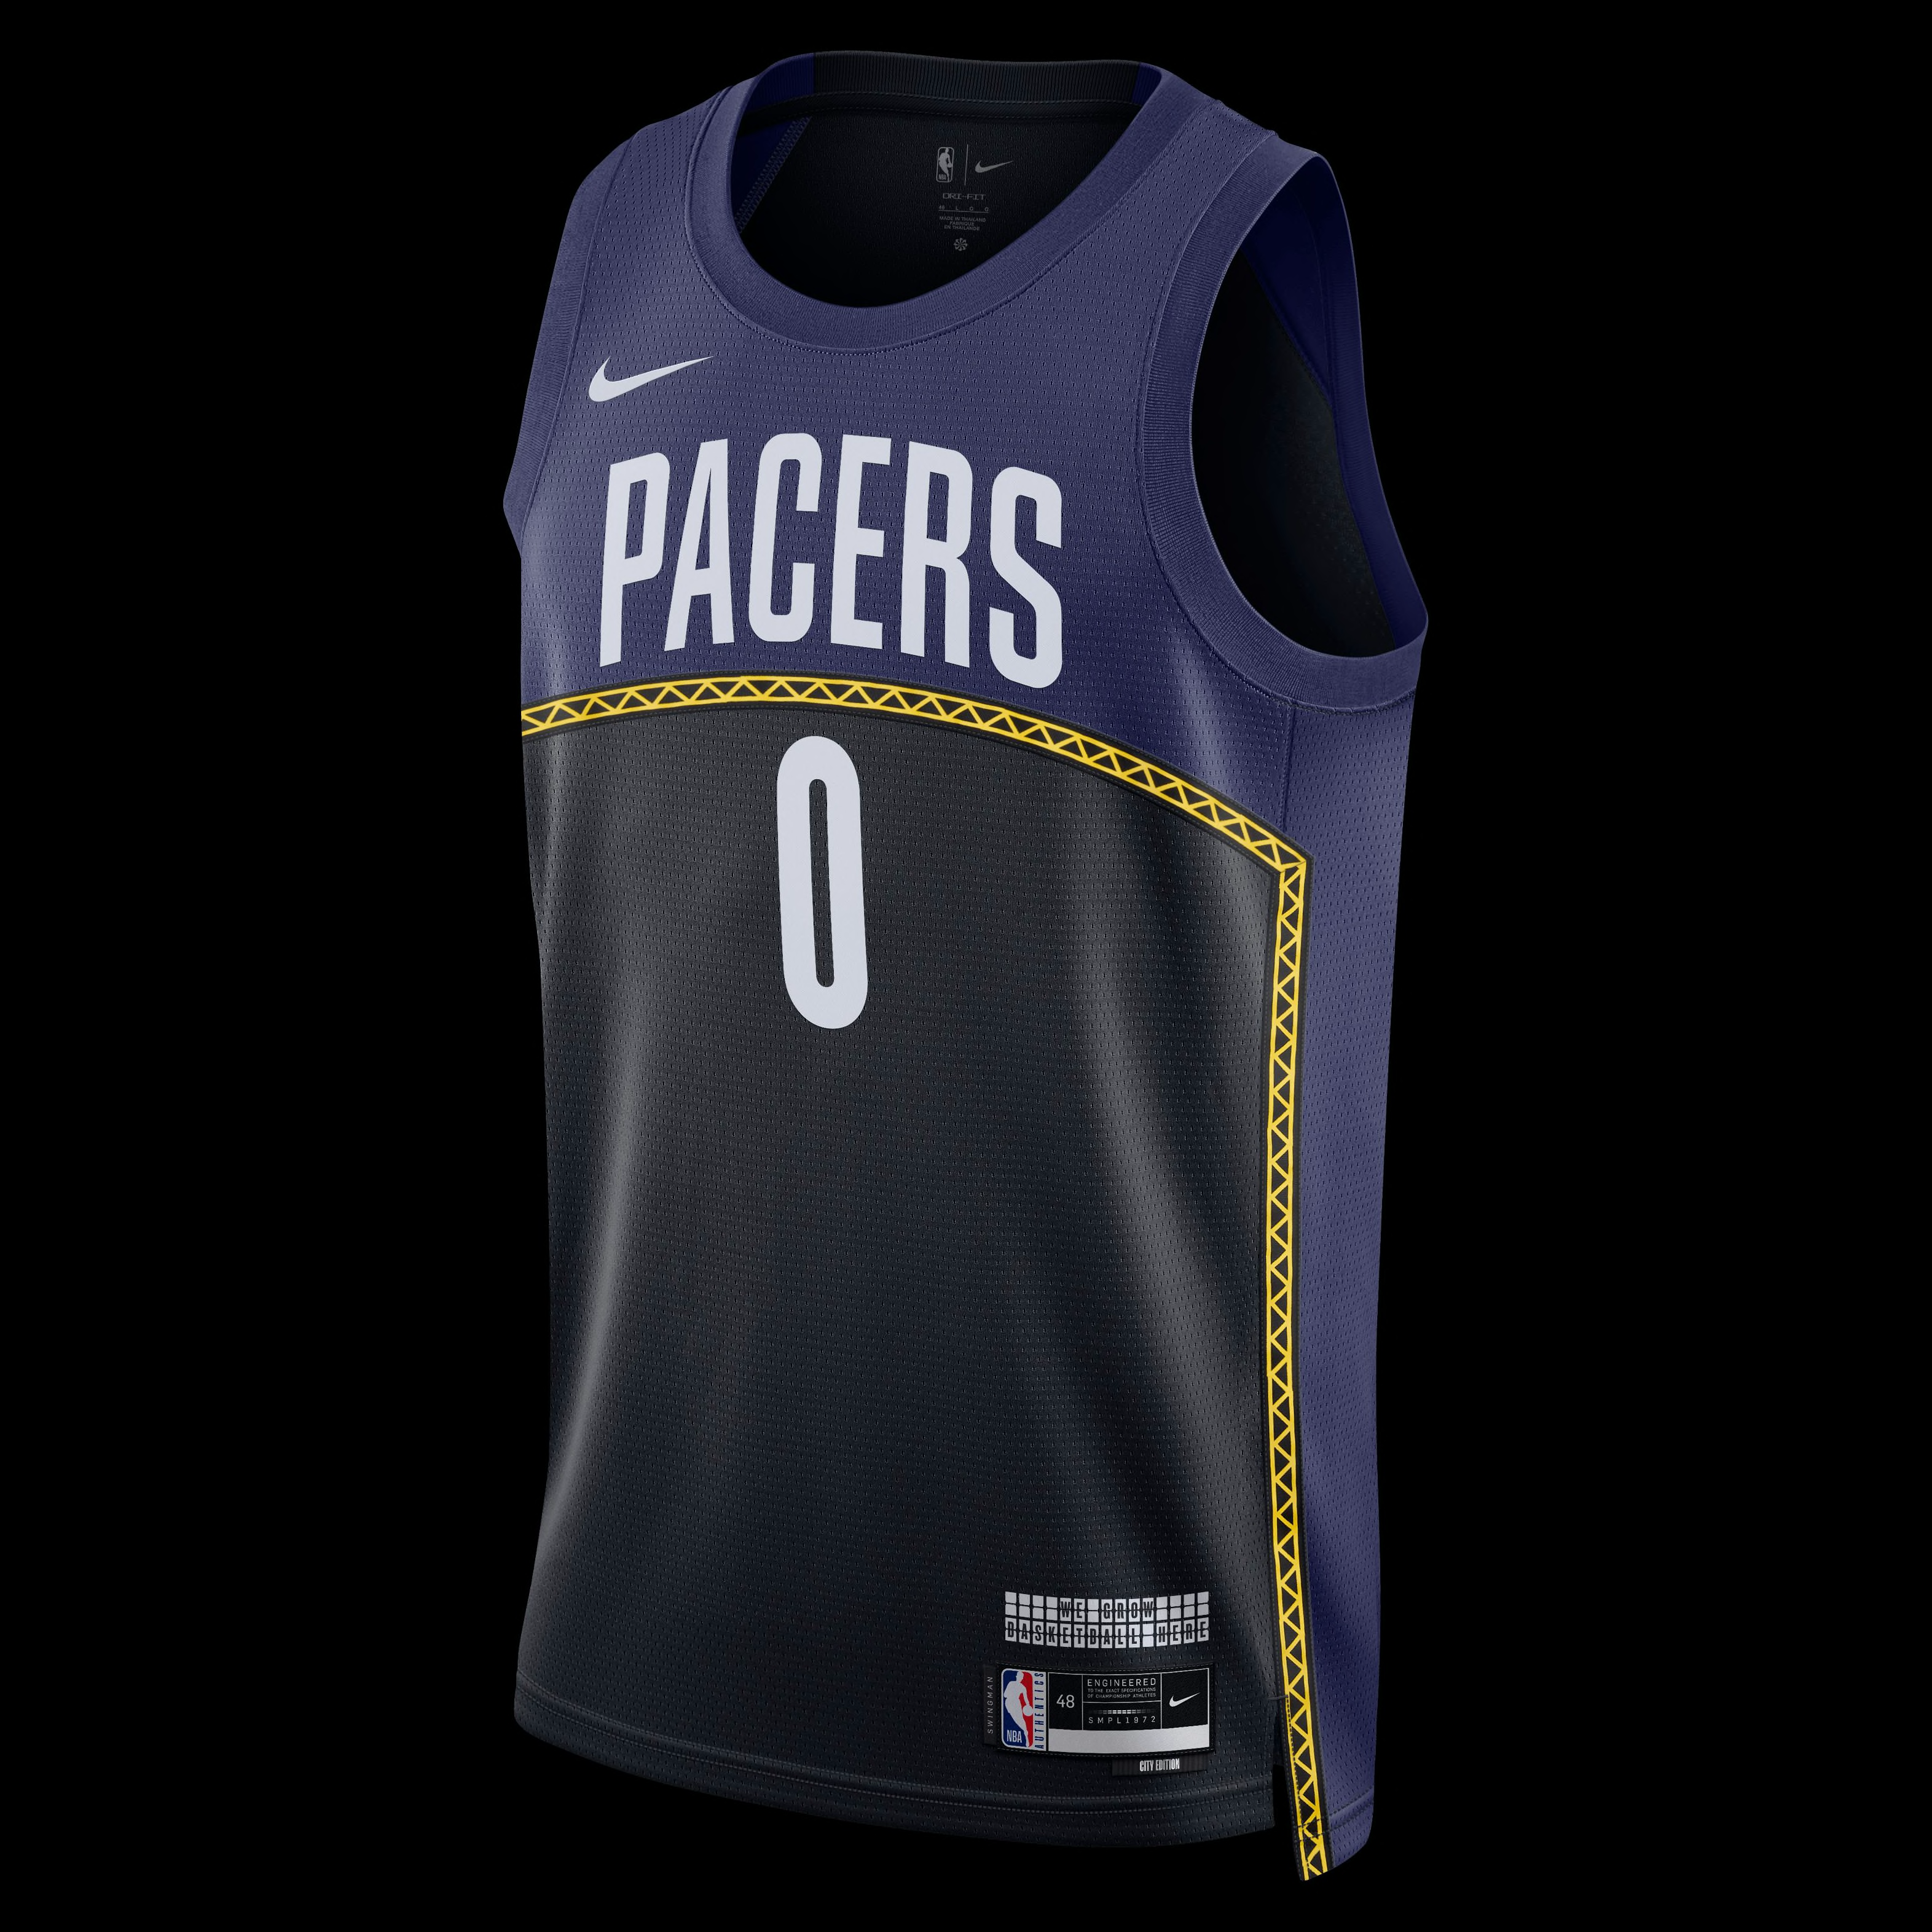 Indiana Pacers announce City Edition uniform for 2022-23 season